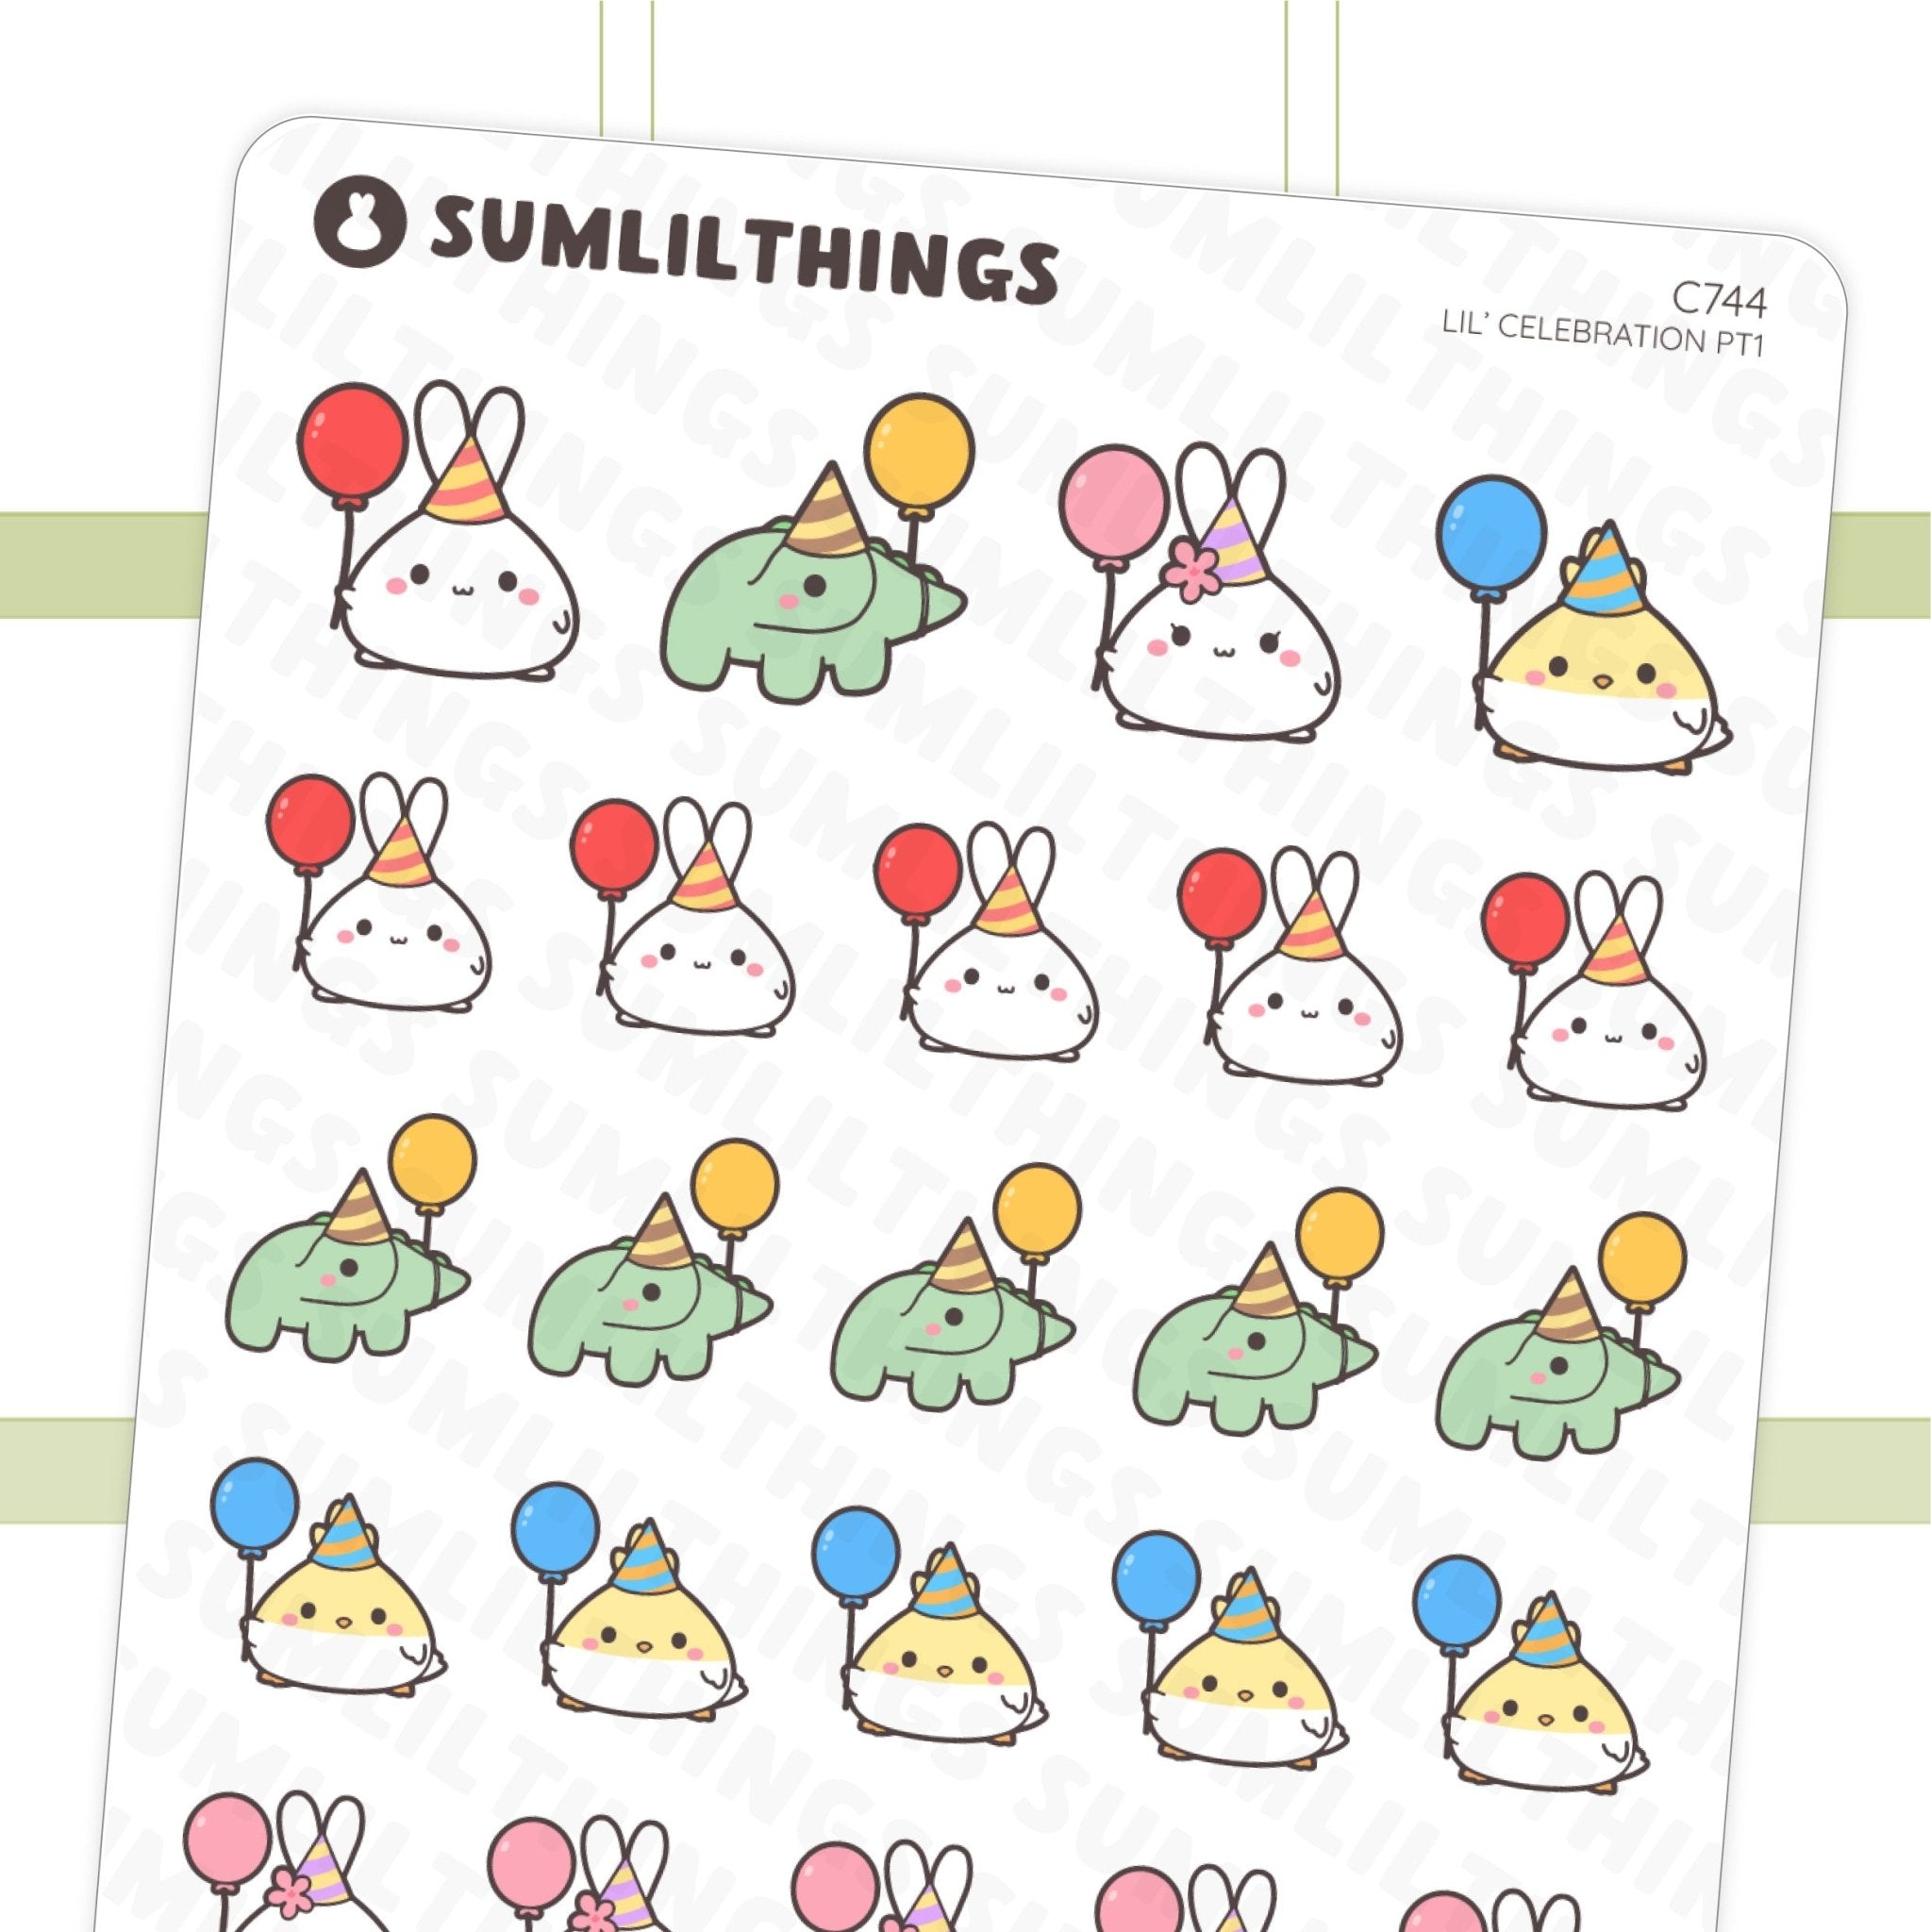 Lil' Celebration Part 1 Stickers - SumLilThings